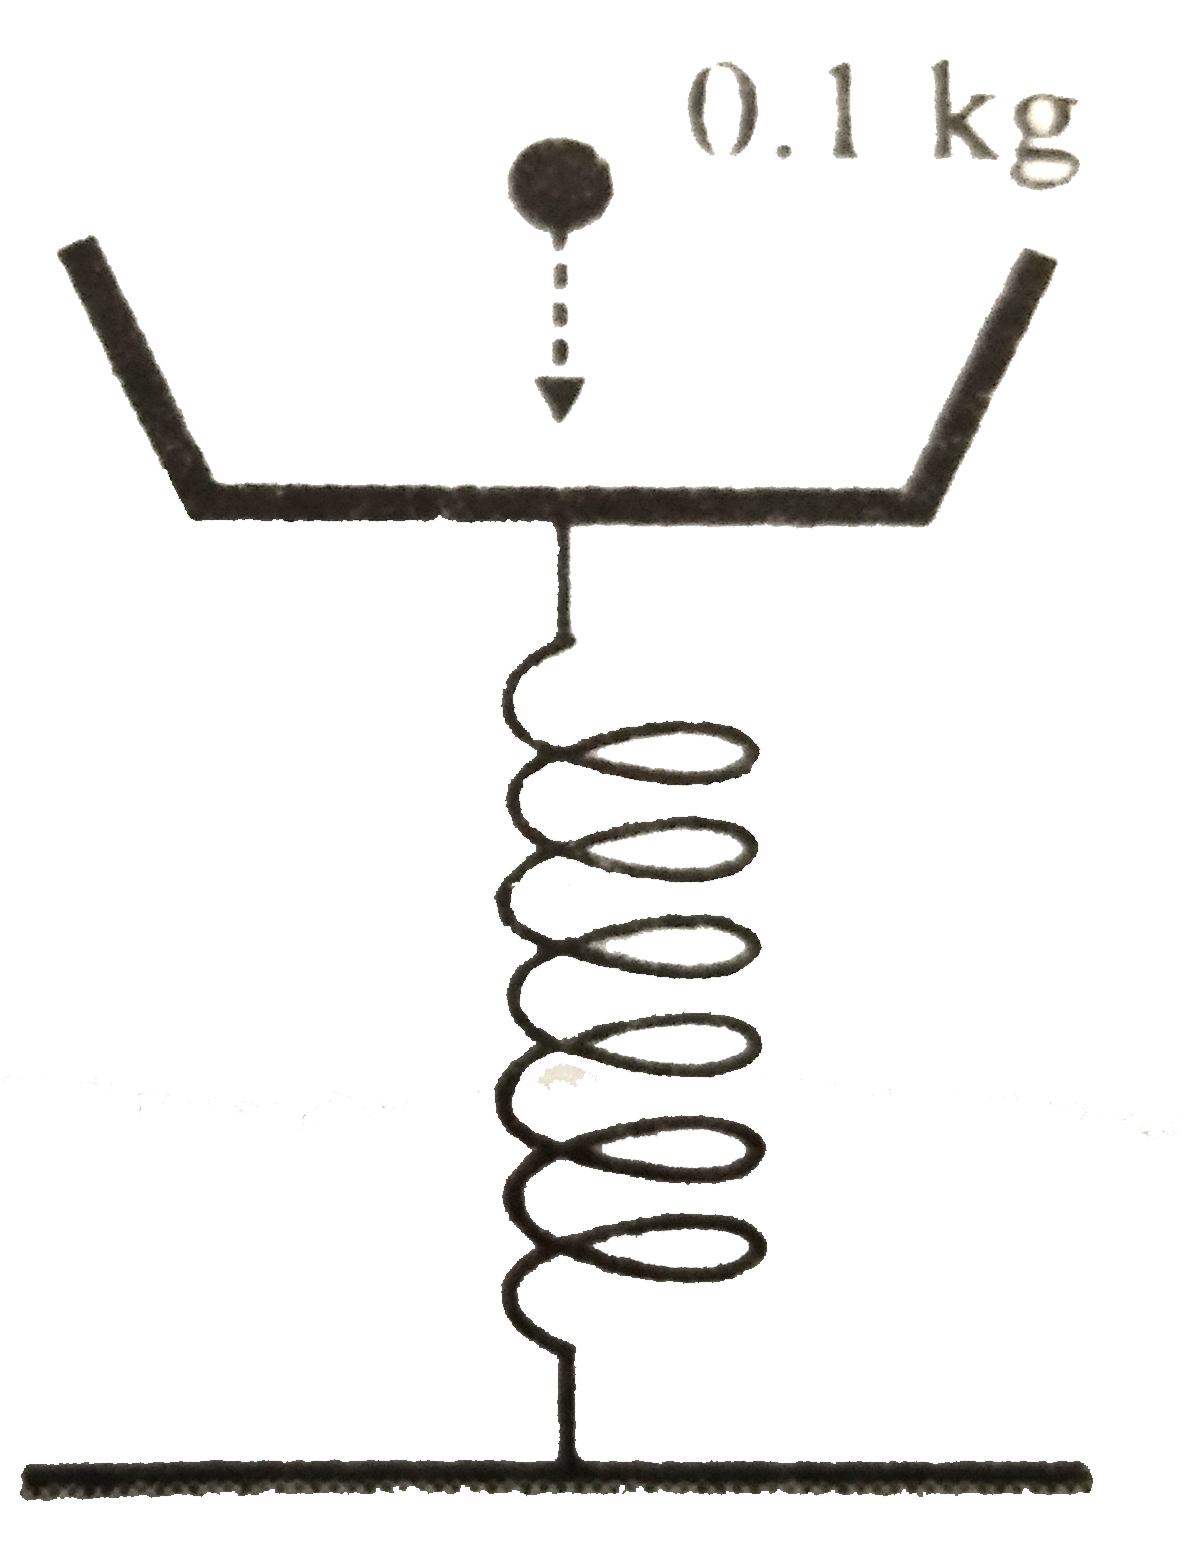 A massless platform is kept on a light 0.1 kg elastic spring, as shown in the figure When particle of mass 0.1 kg is dropped on the pan from a height of 0.24 m, the particle strikes the pan, and the spring is compressed by 0.01 m. From what height should the particle be dropped to cause a compression of 0.04 m ?